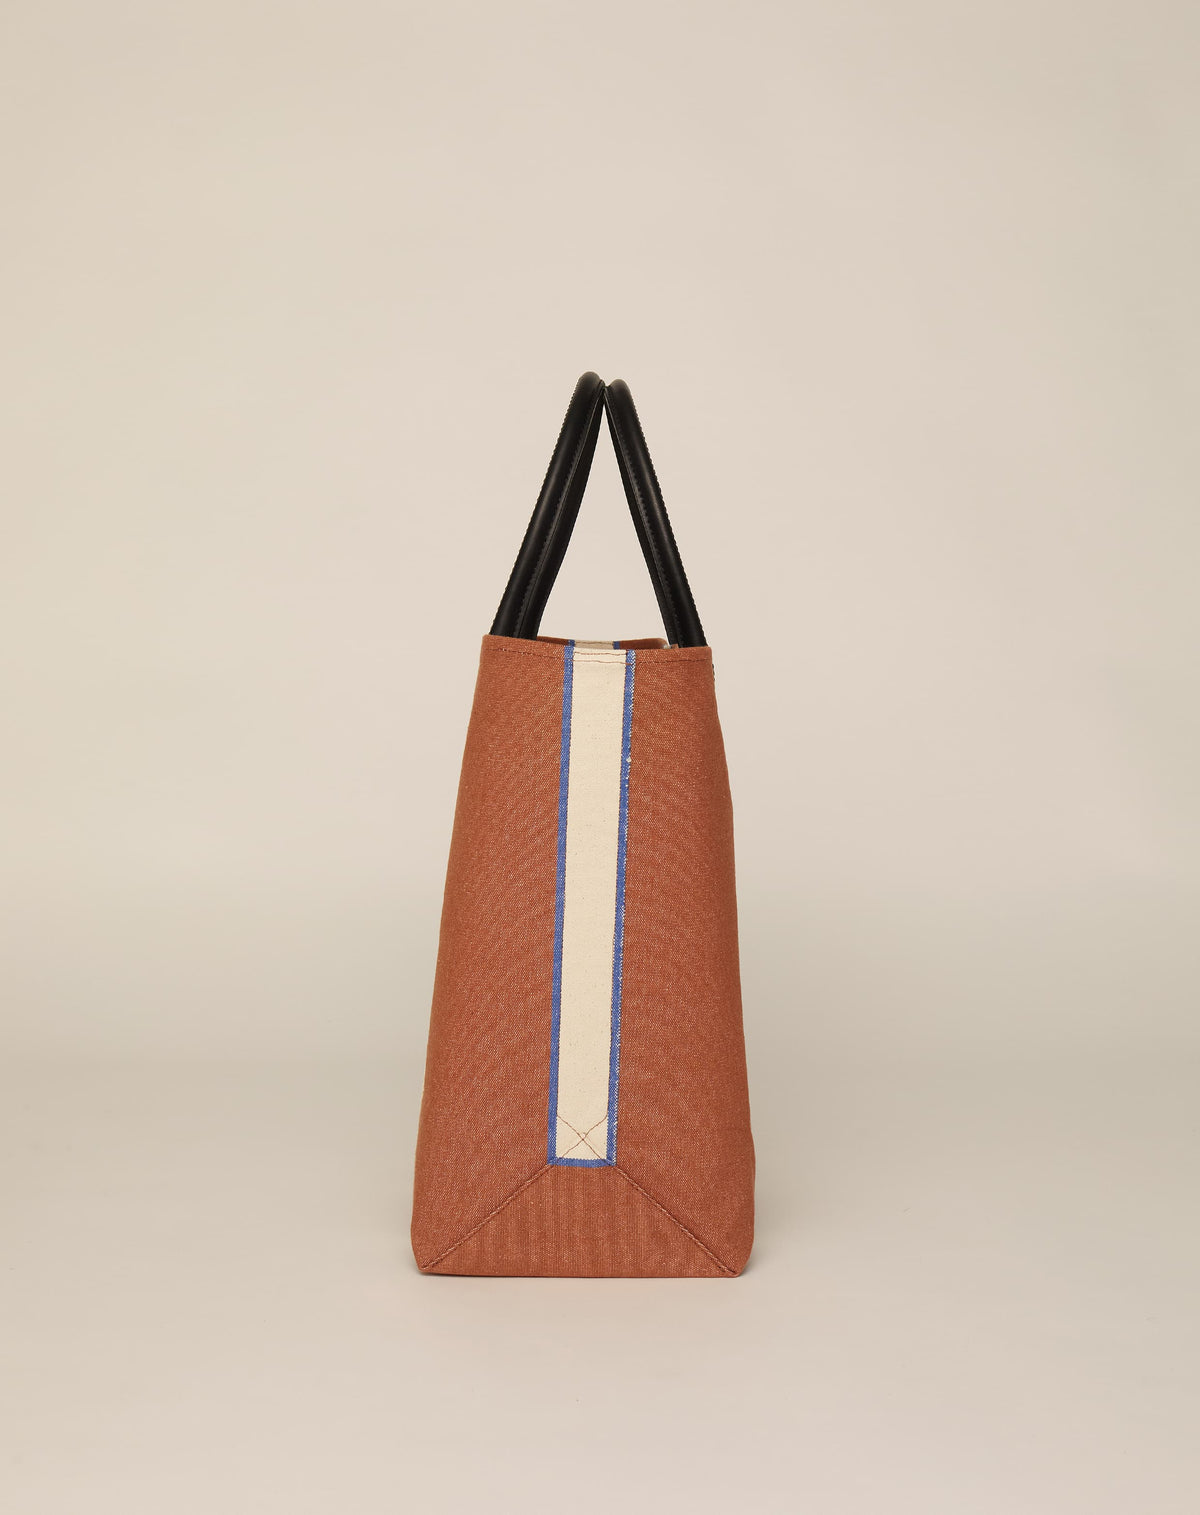 Image of side of medium-sized classic canvas tote bag in tan colour with black leather handles and contrasting stripes.